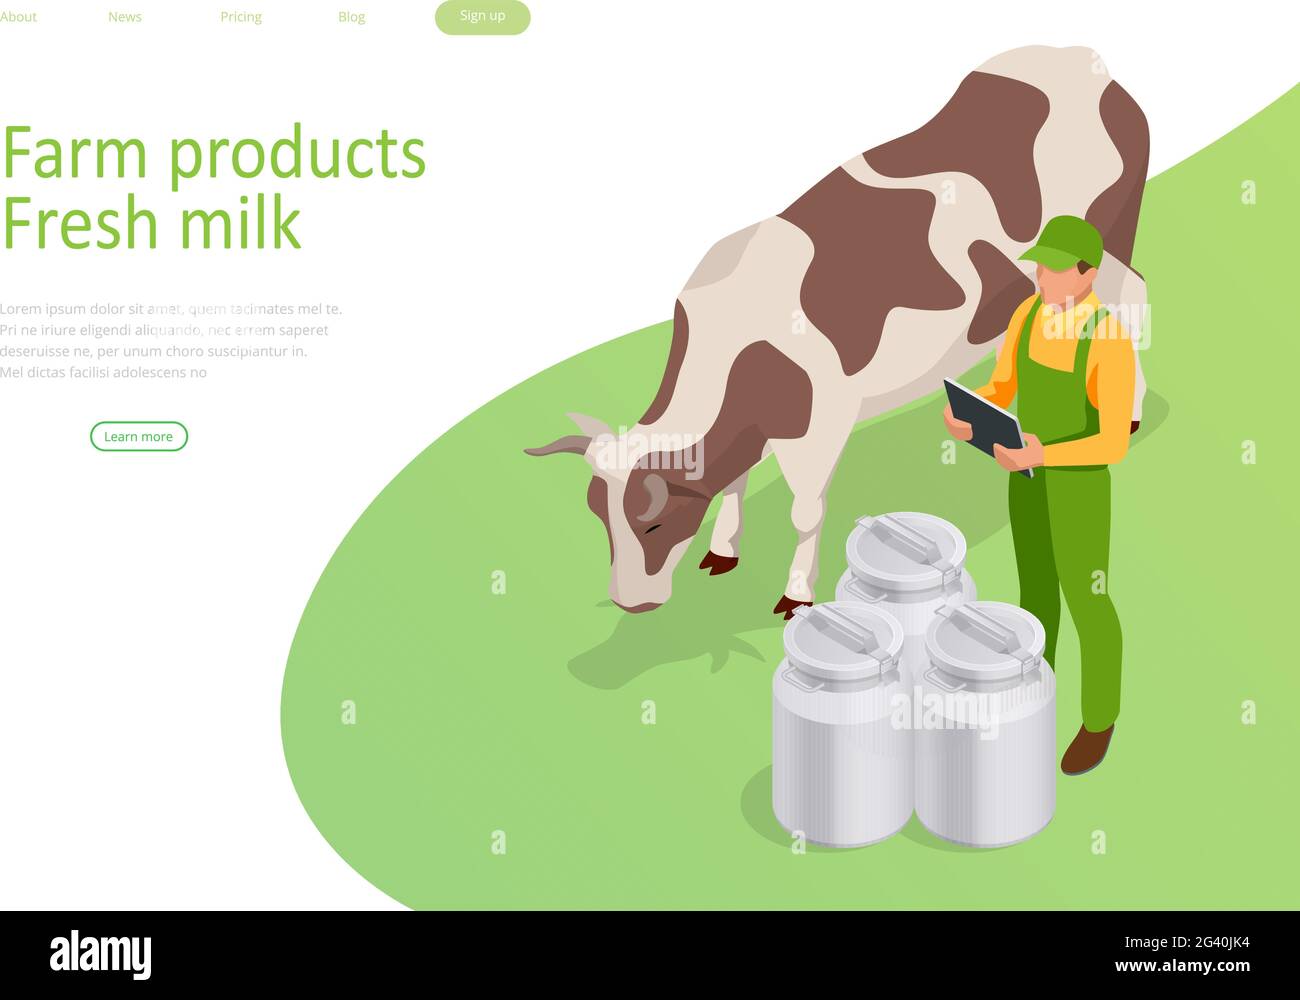 Isometric Farmer is Working on the Organic Farm with Dairy Cows. Milk Produce Production Chain from a Dairy Farm, Fresh Milk. Stock Vector